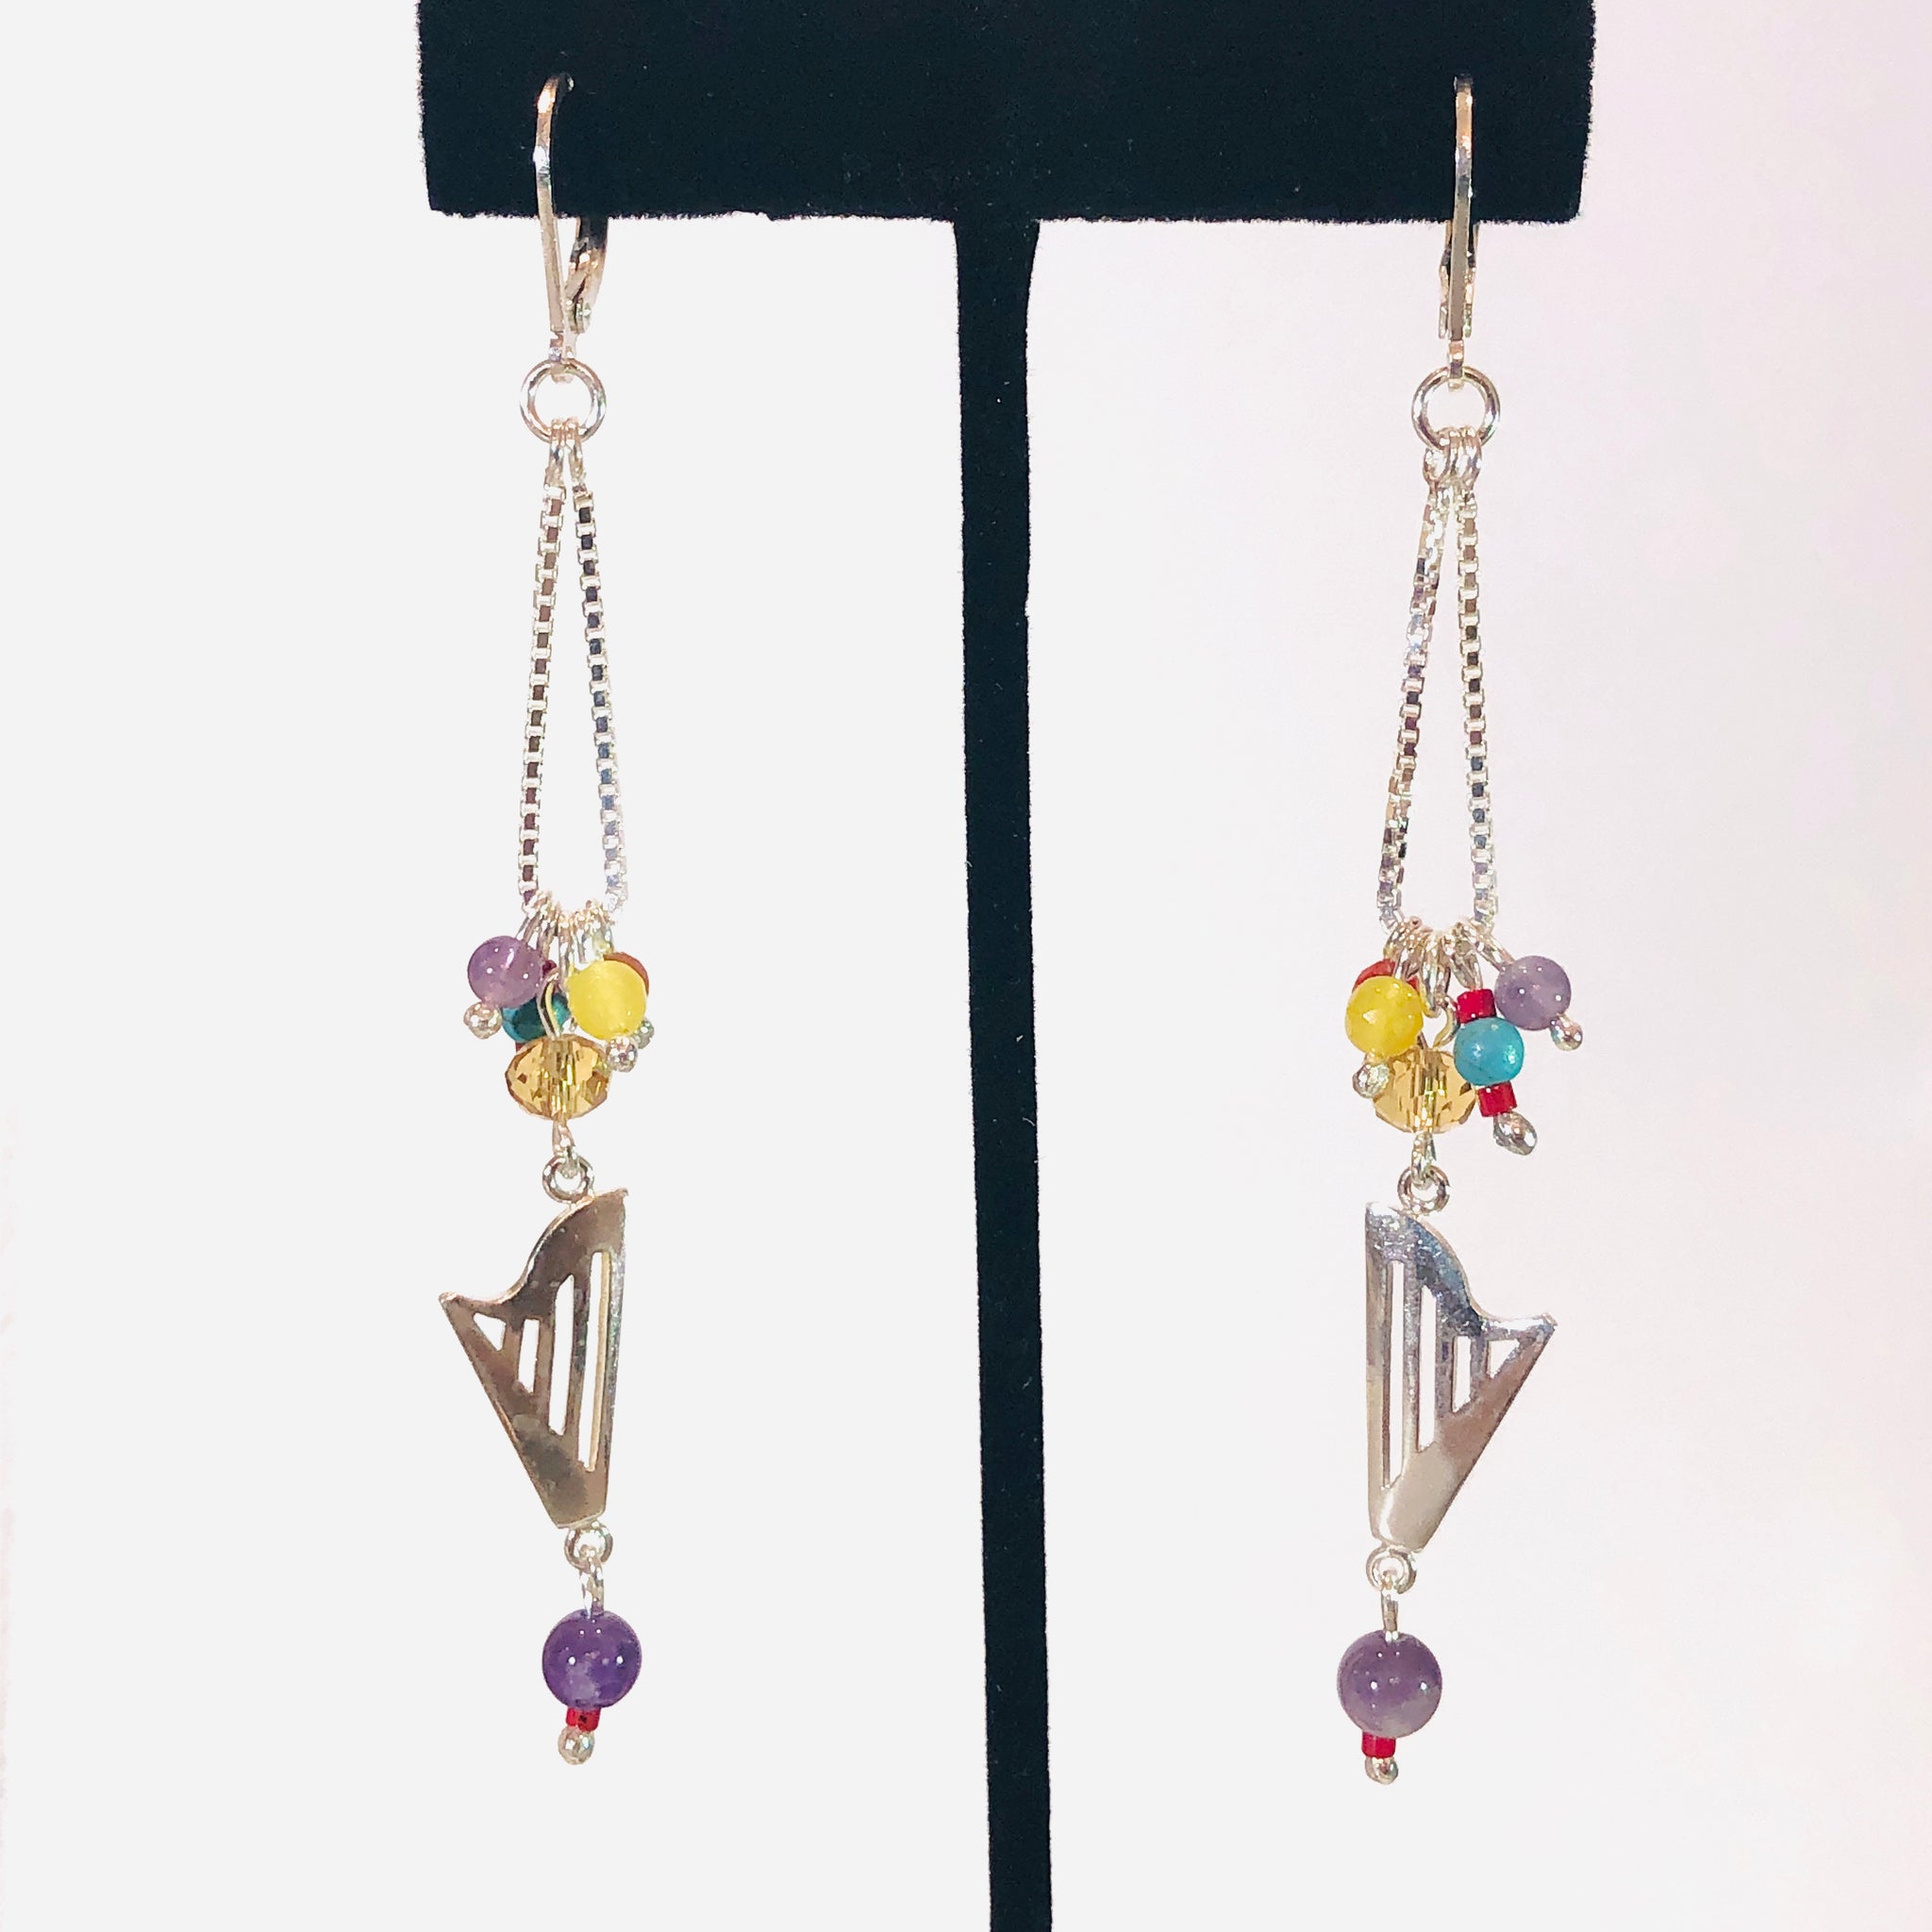 ONE OF A KIND CLASSIC HARP MULTICOLOR BEADED CHAIN LOOP LEVER LOCK EARRINGS